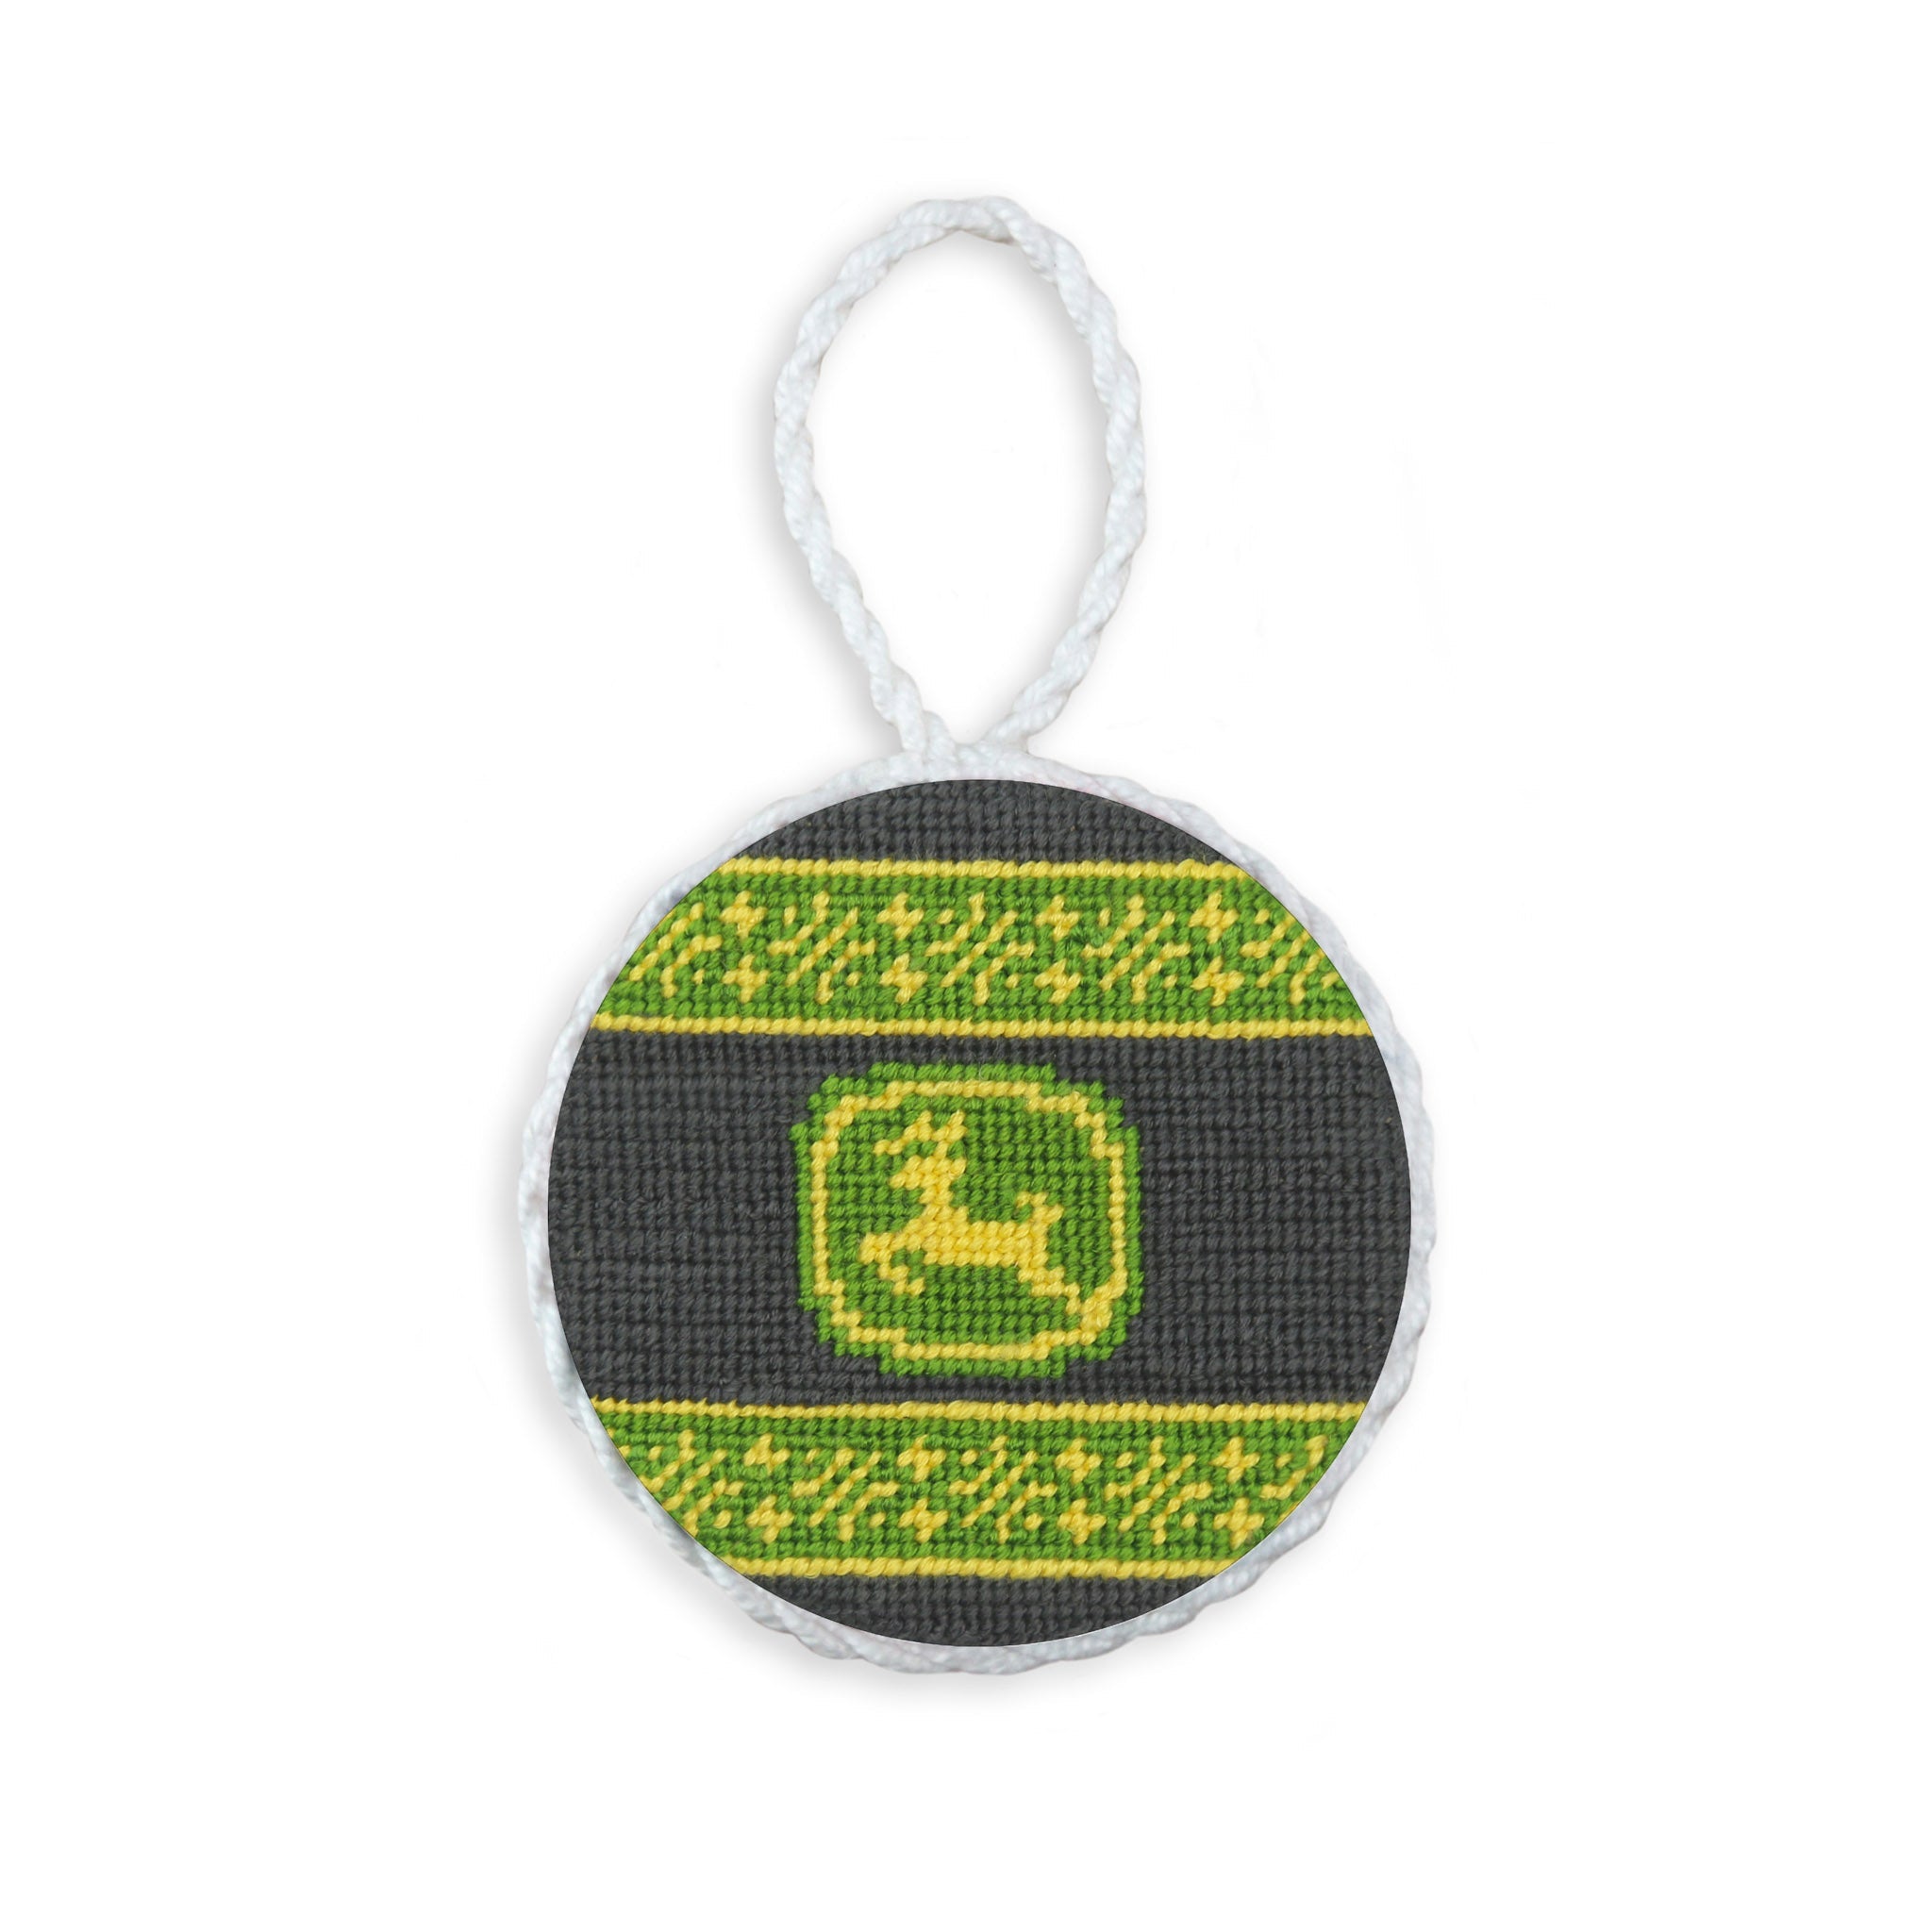 Smathers and Branson John Deere Charcoal Needlepoint Ornament 